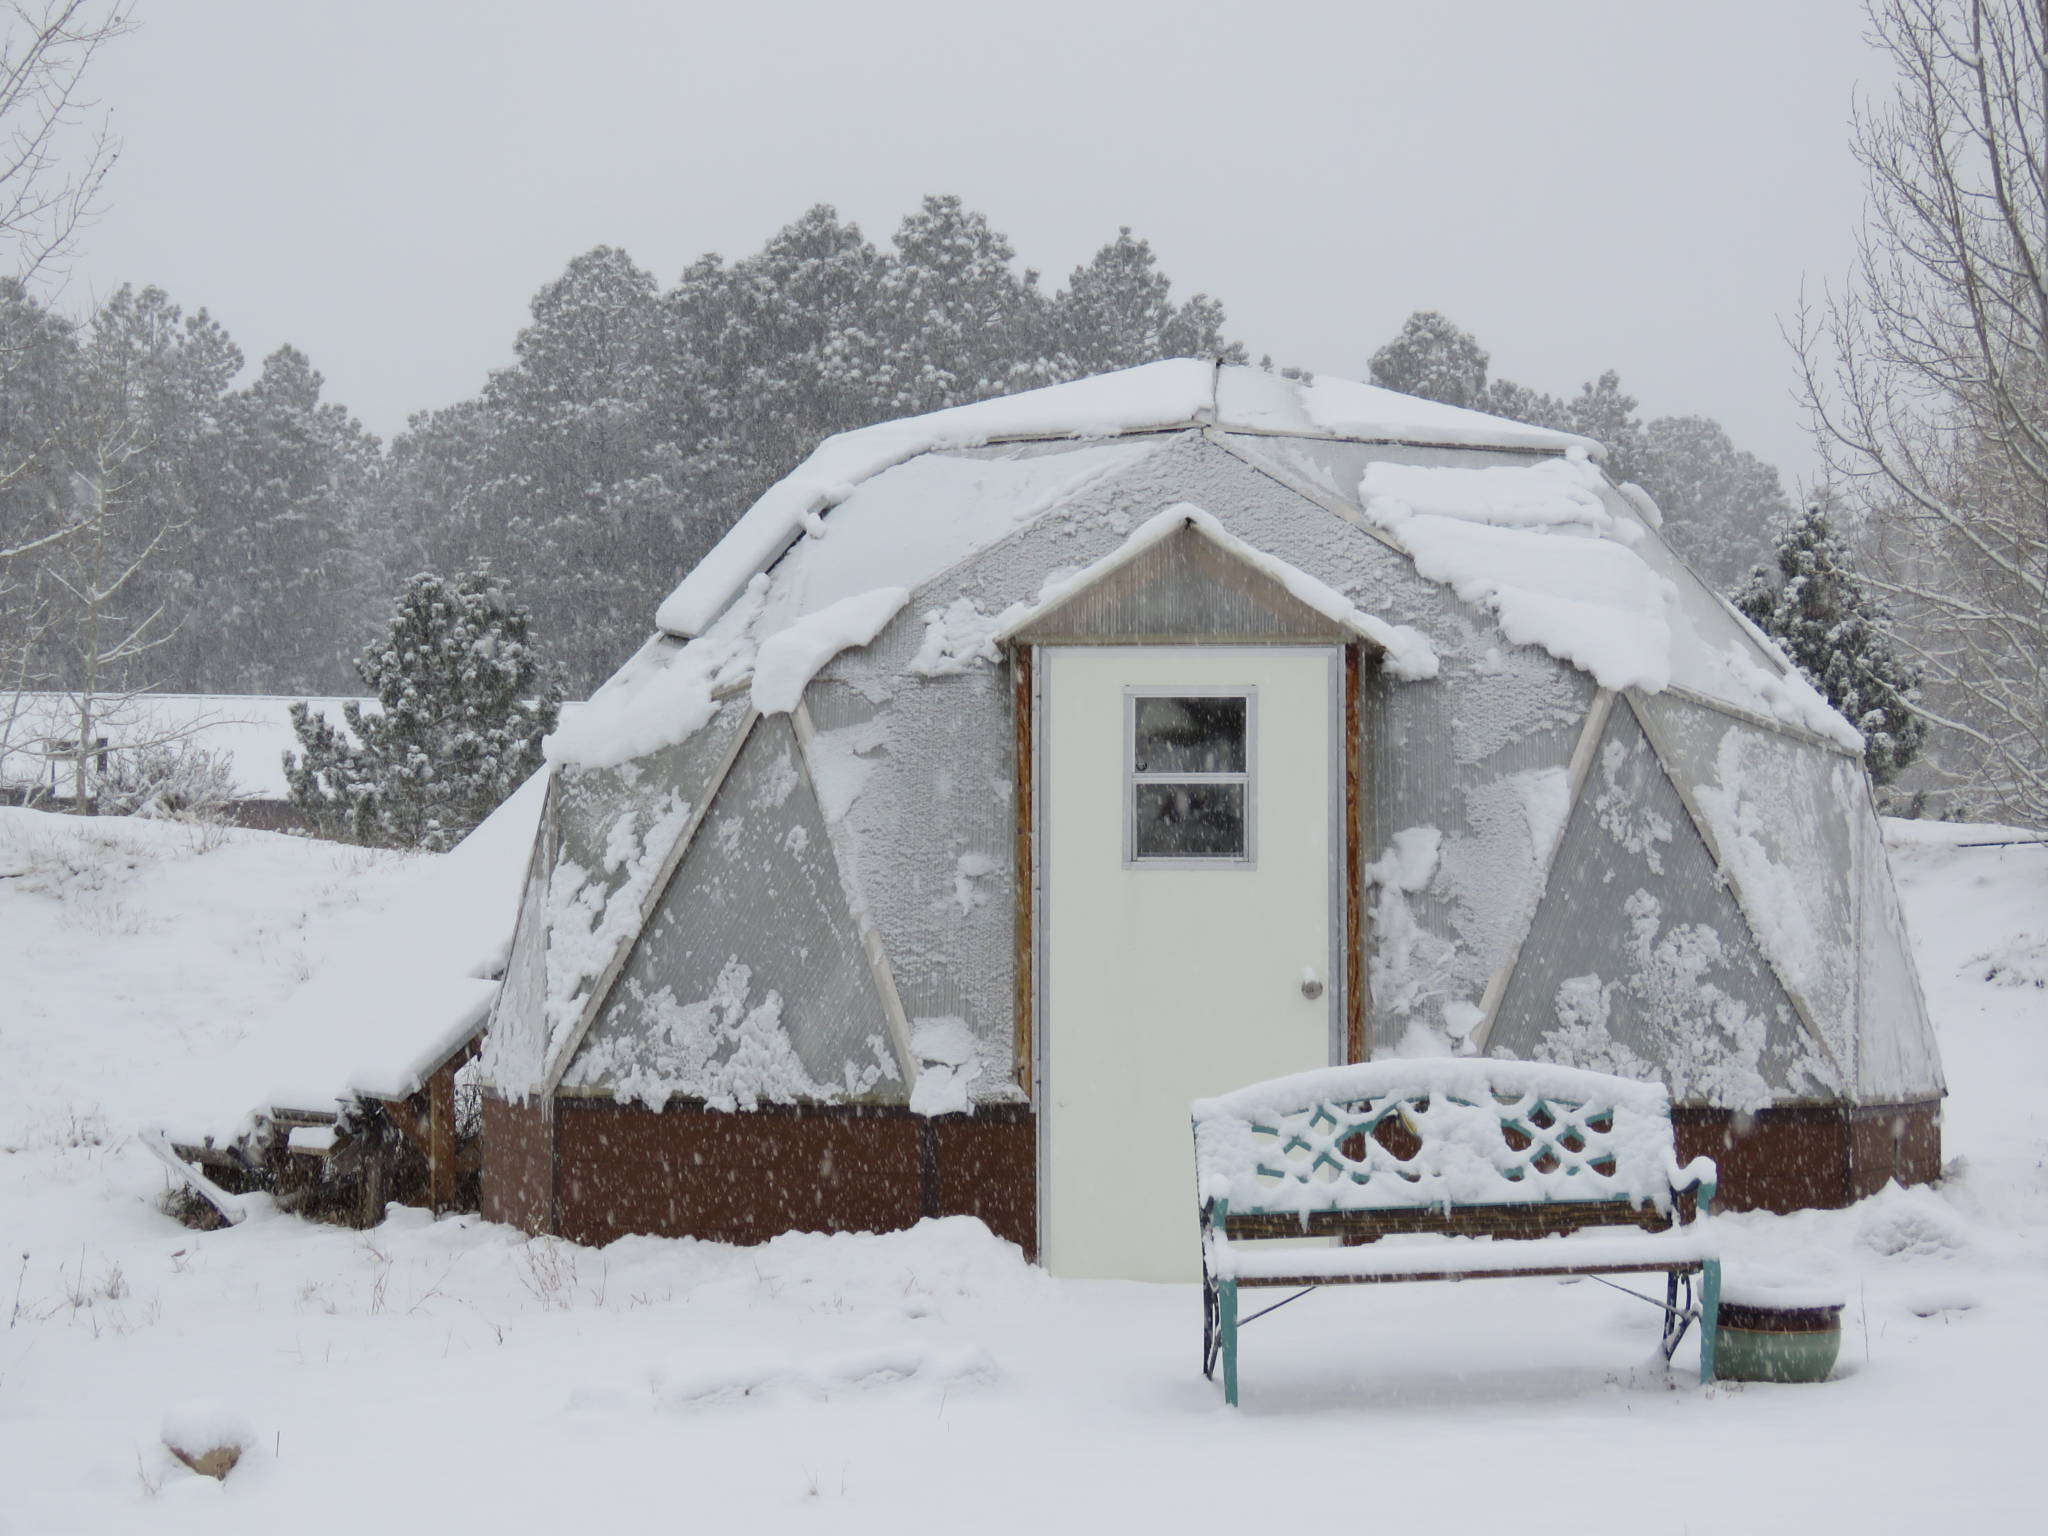 Snow covered Growing Dome greenhouse